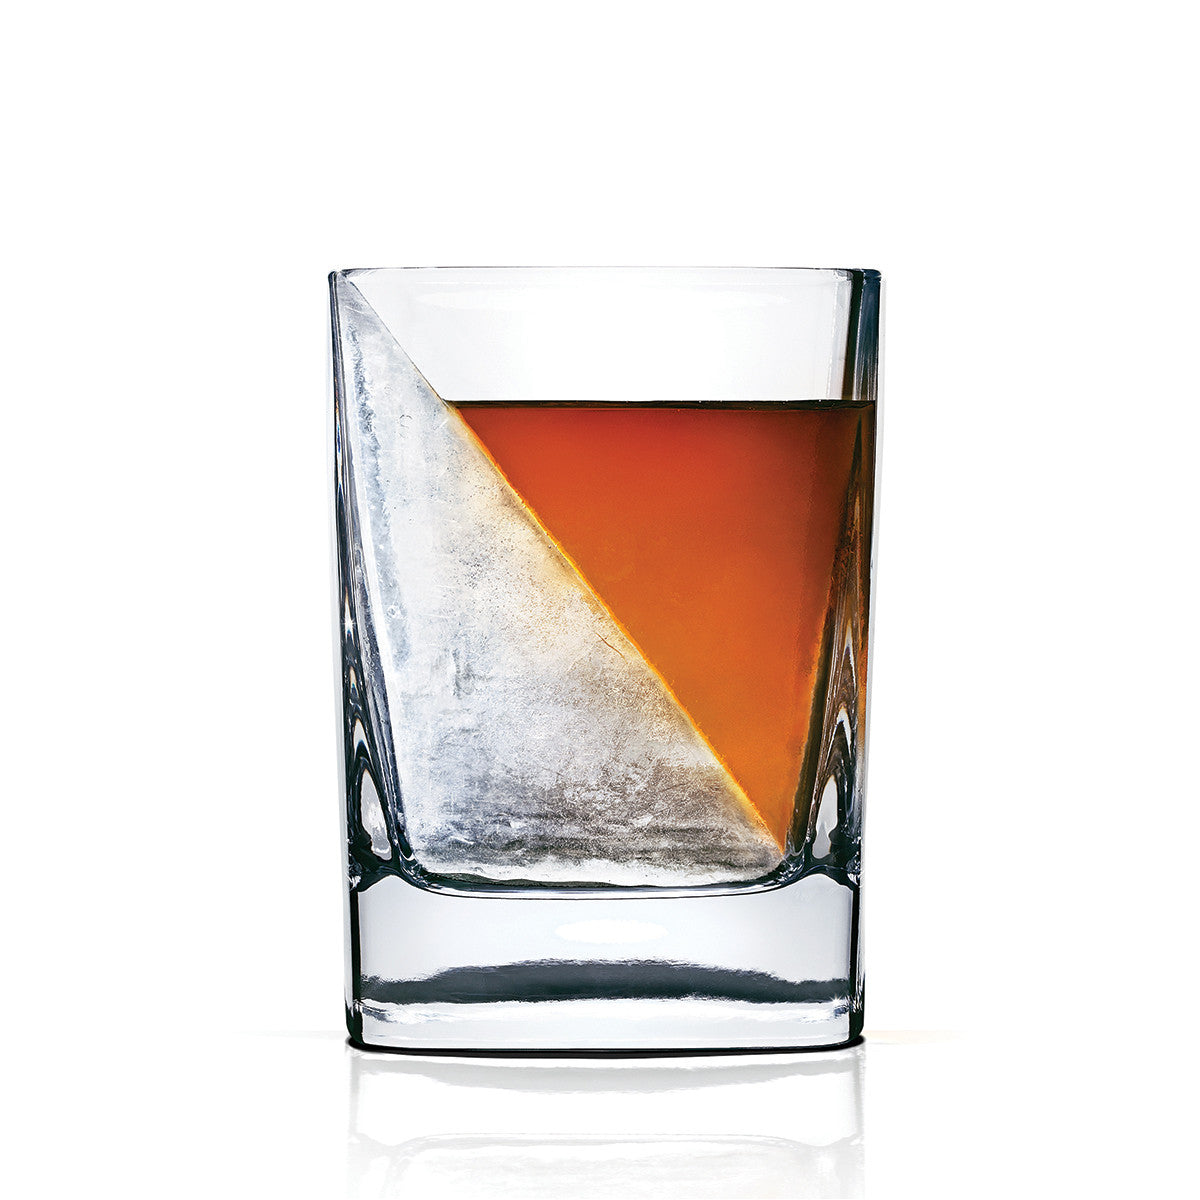 Corkcicle Whisky Wedge Ice Mould